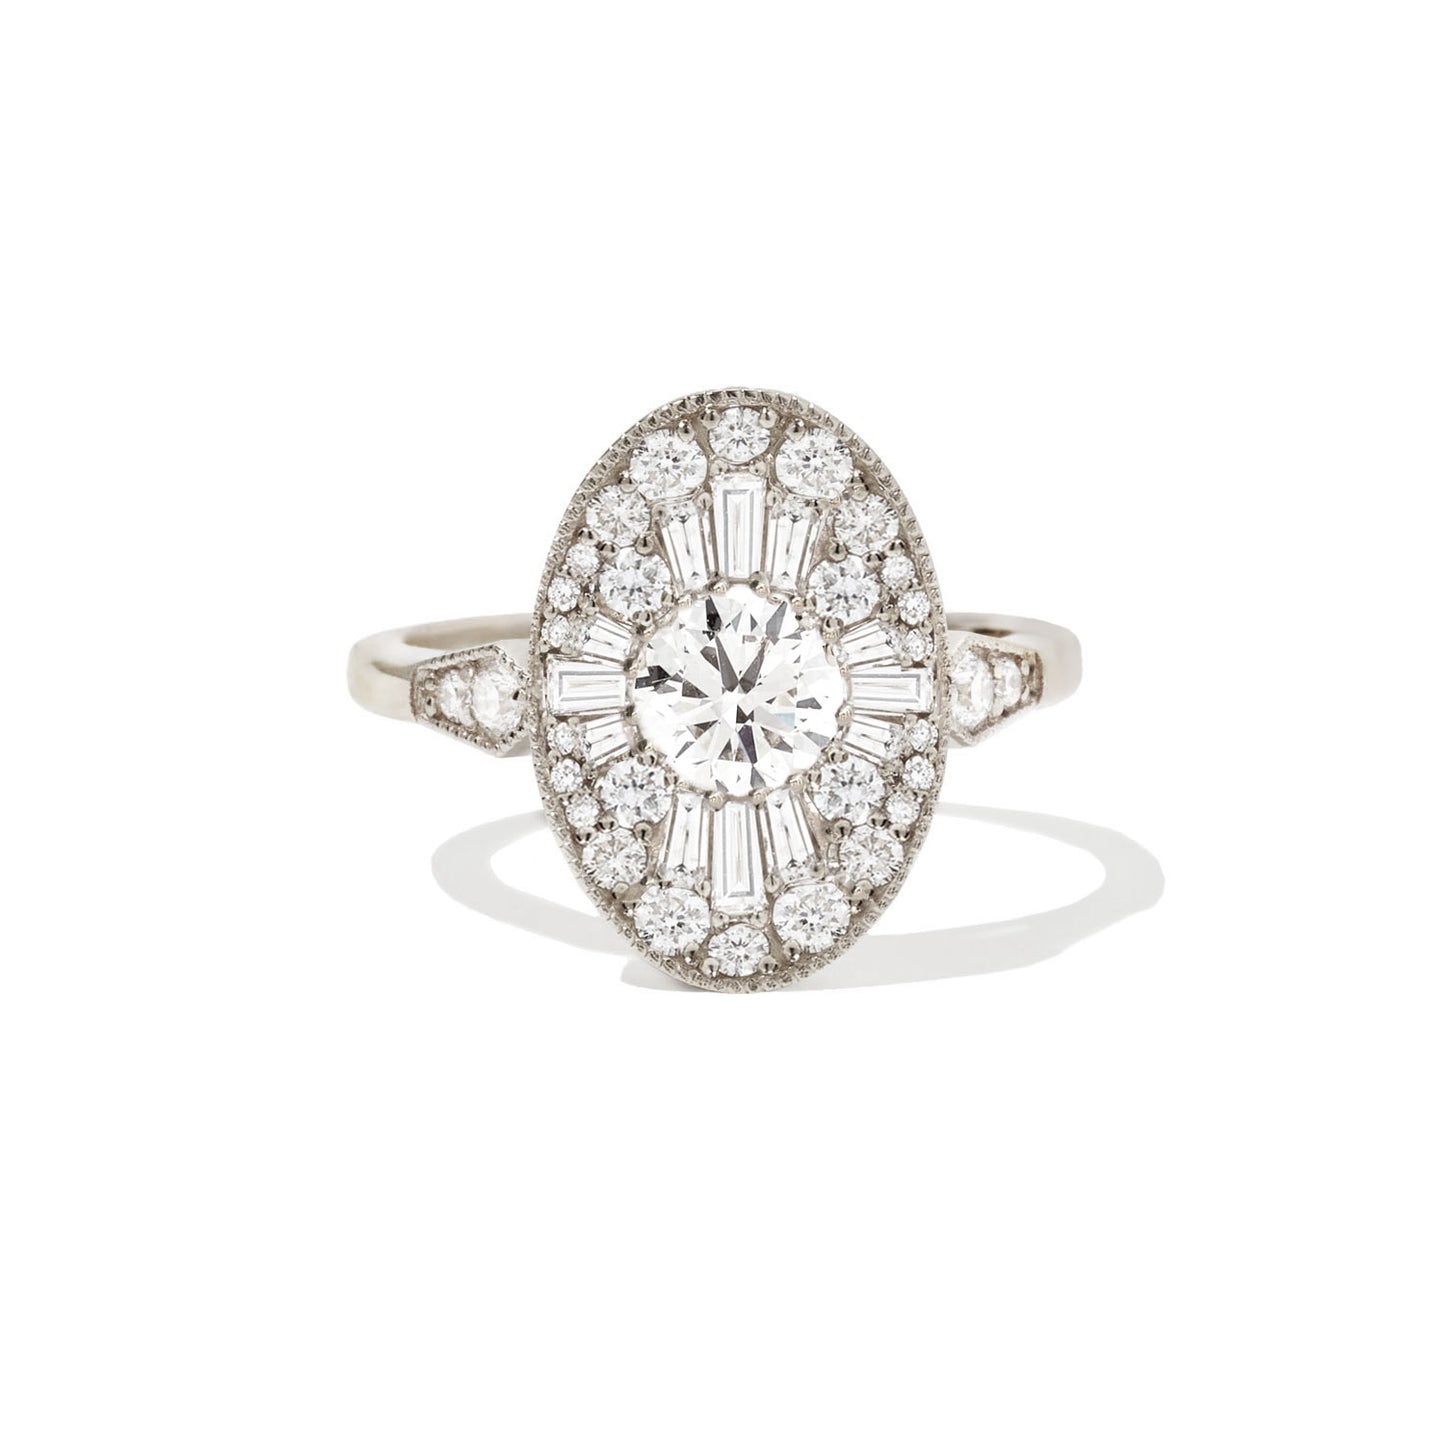 Unique Oval Shape Halo Diamond Engagement Ring | Berlinger Jewelry